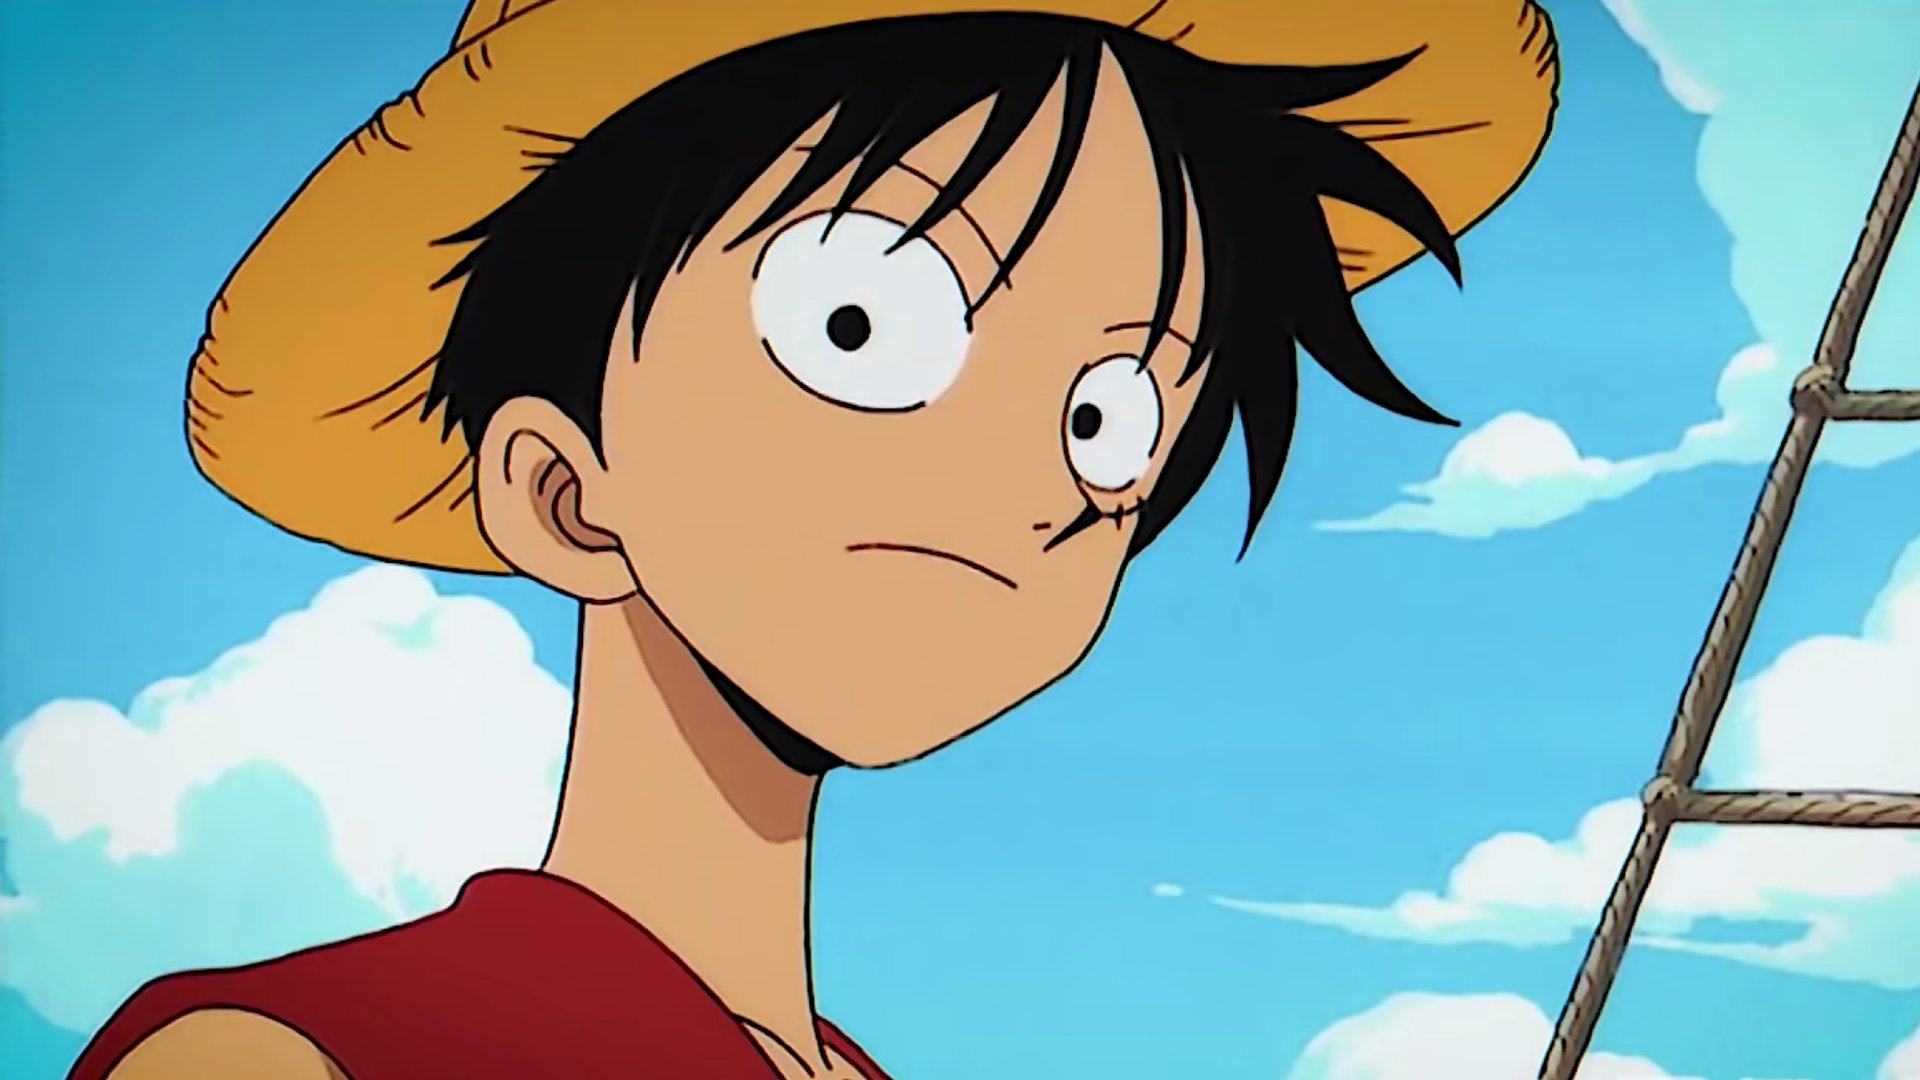 Luffy is wearing a hat and looking at something out of the corner of his eye.